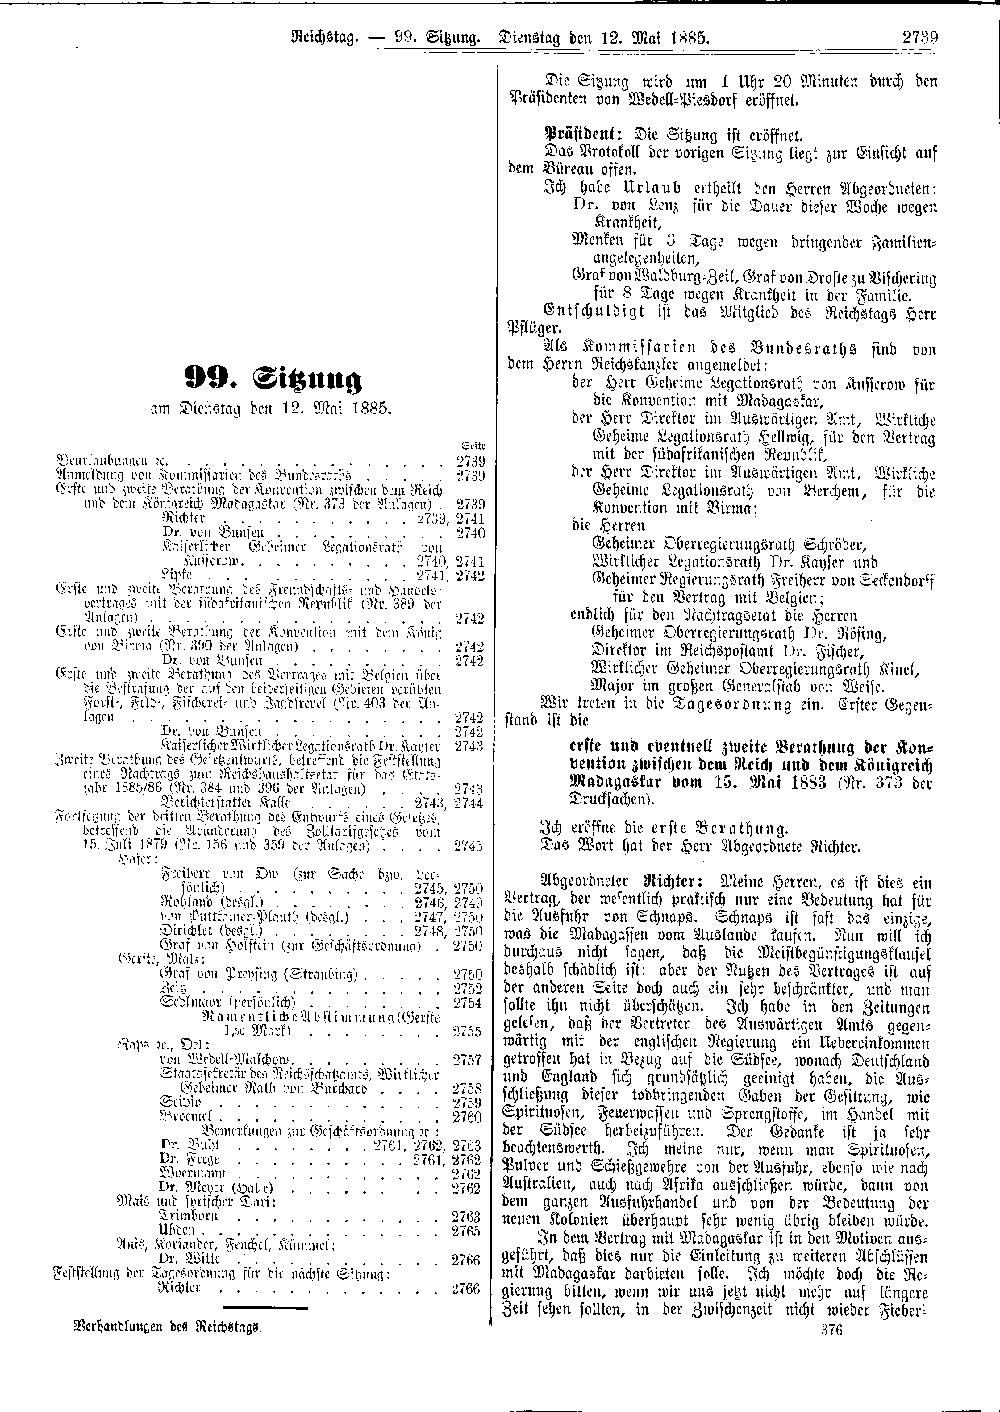 Scan of page 2739